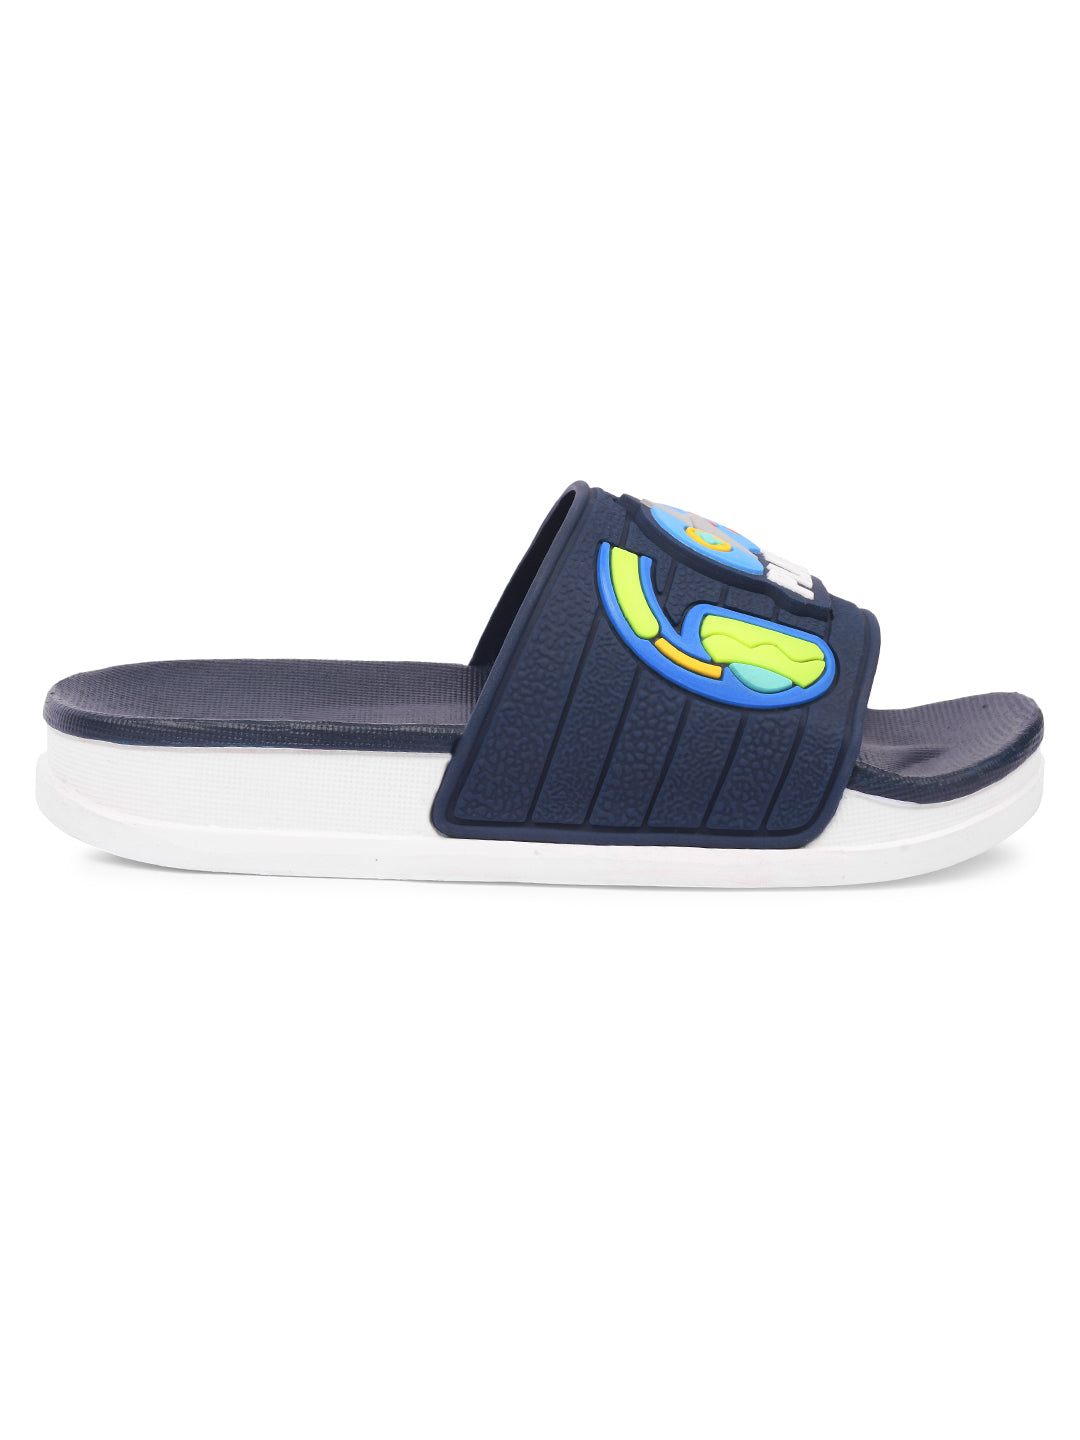 KATS Coco-104 Navy Synthetic Solid Slippers Flipflop for Kids (3 Years to 5 Years)